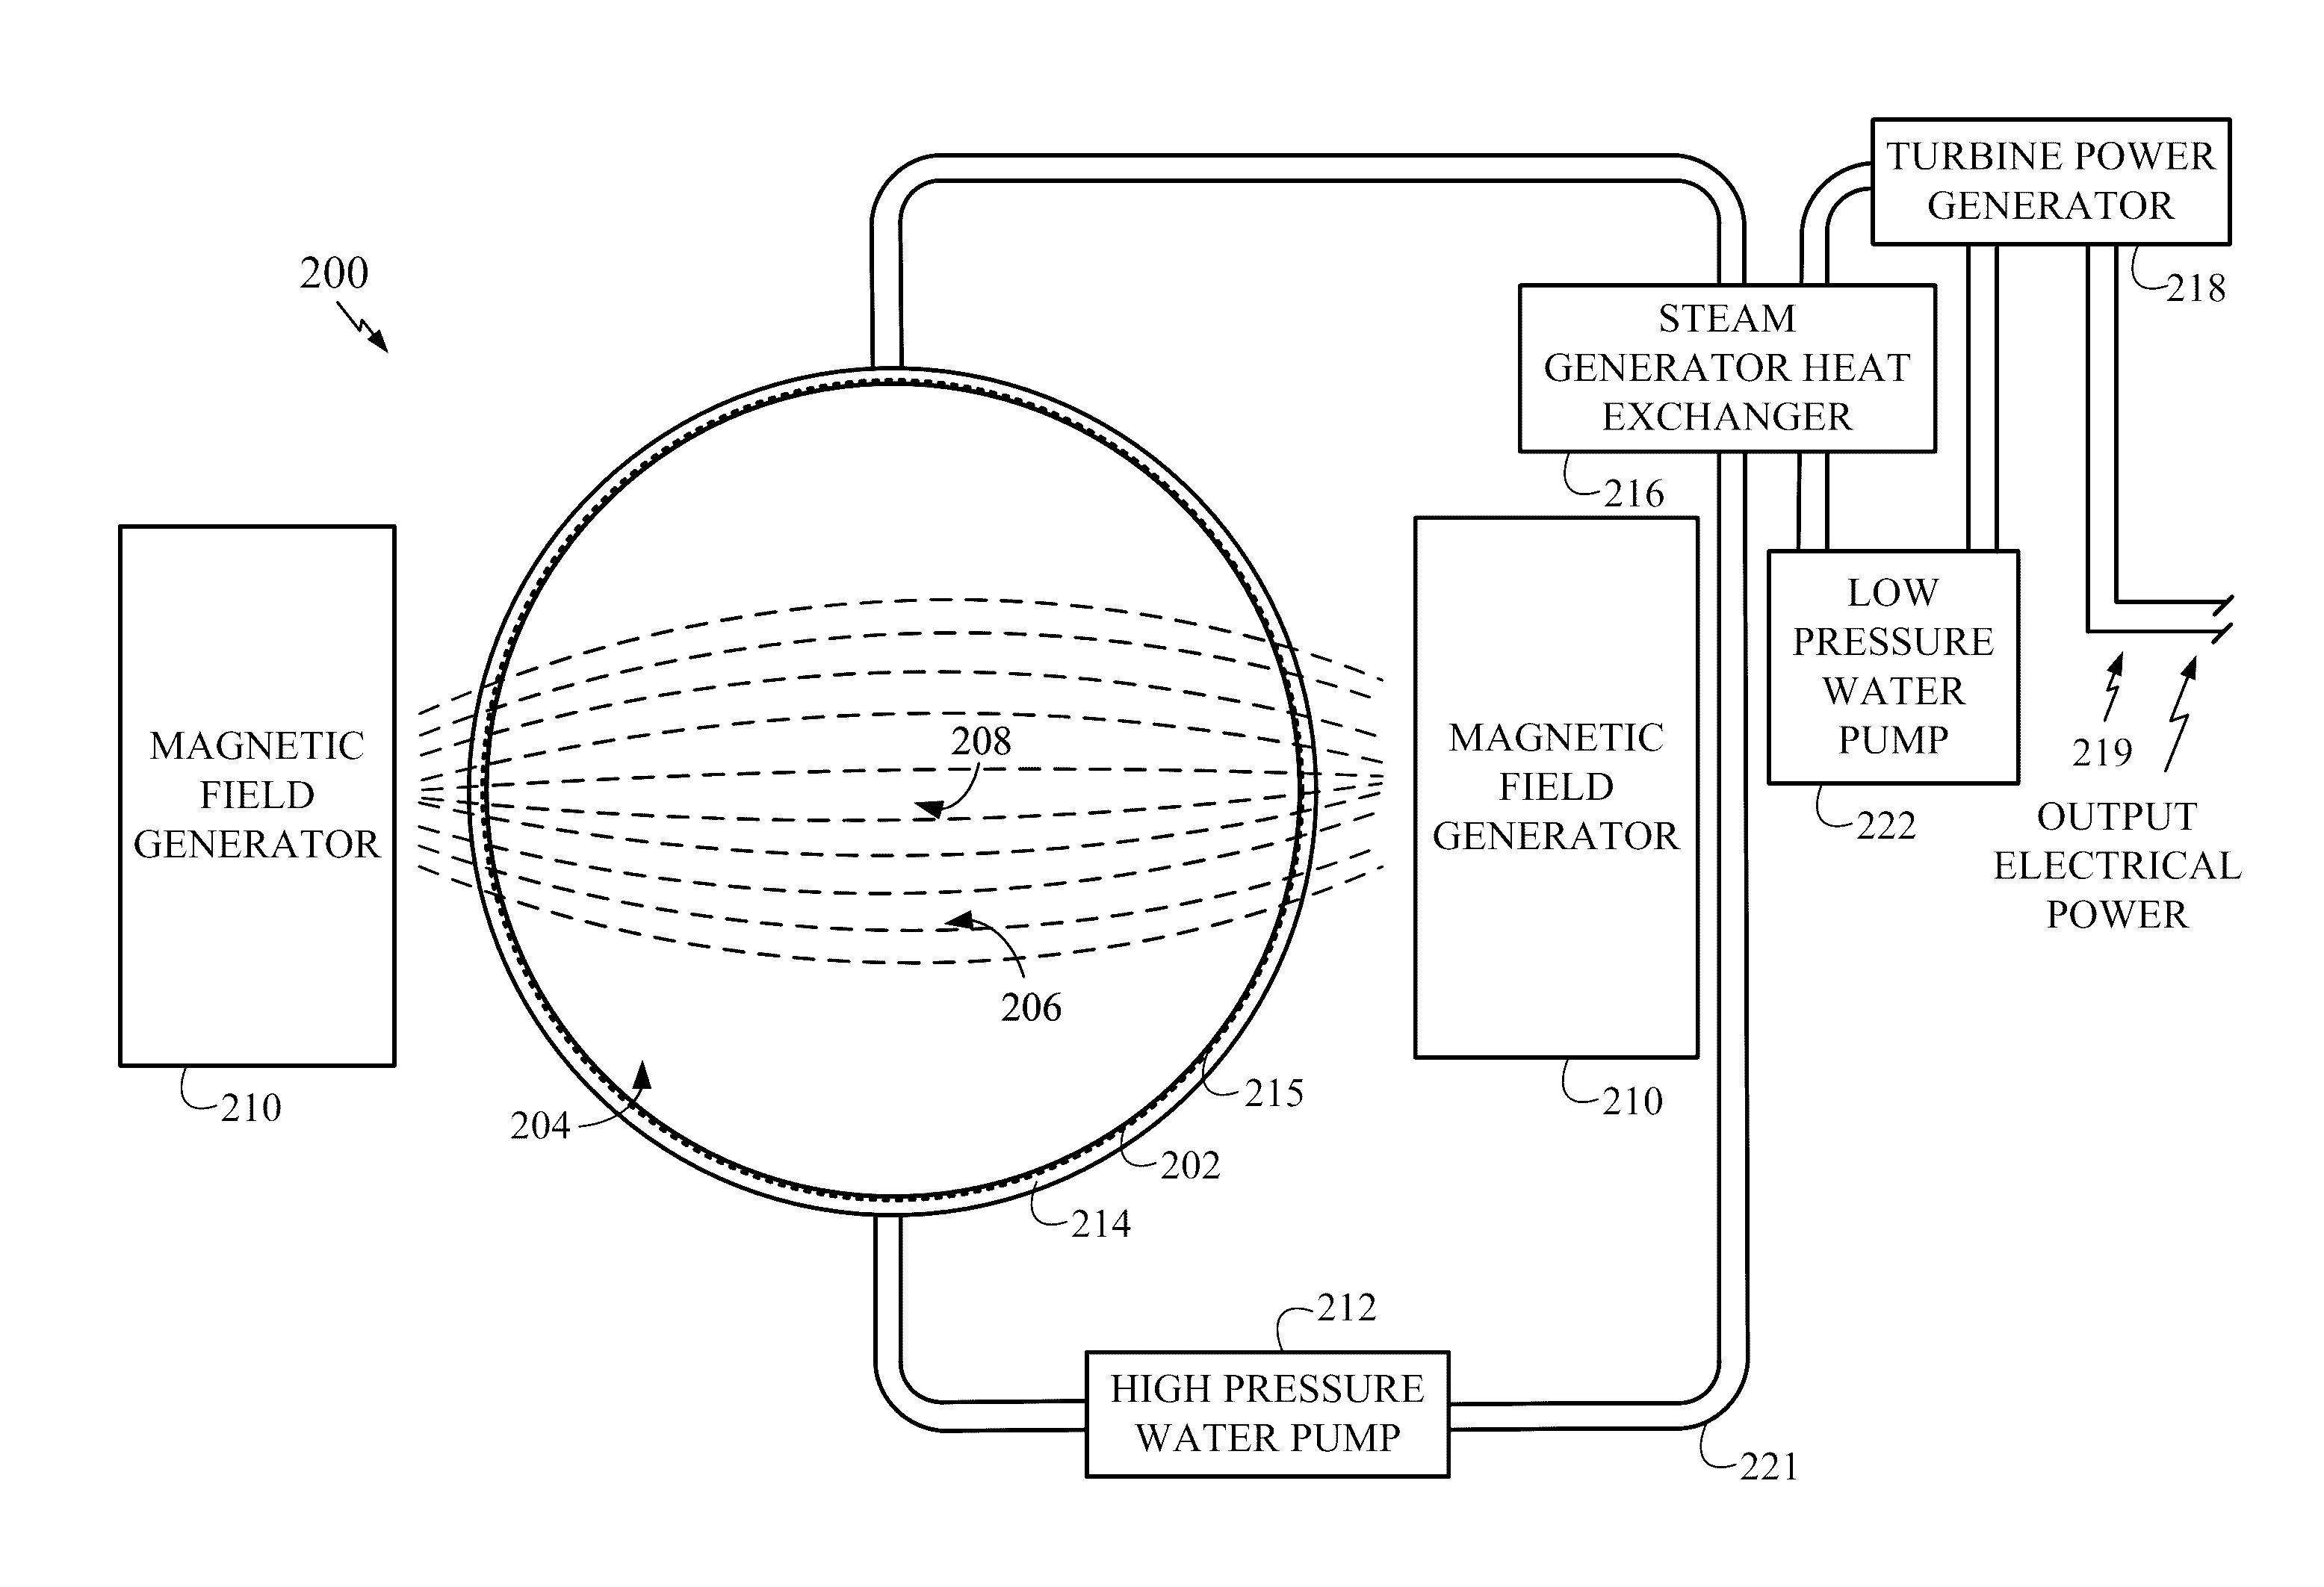 Spherical fusion reactor with aerogel material